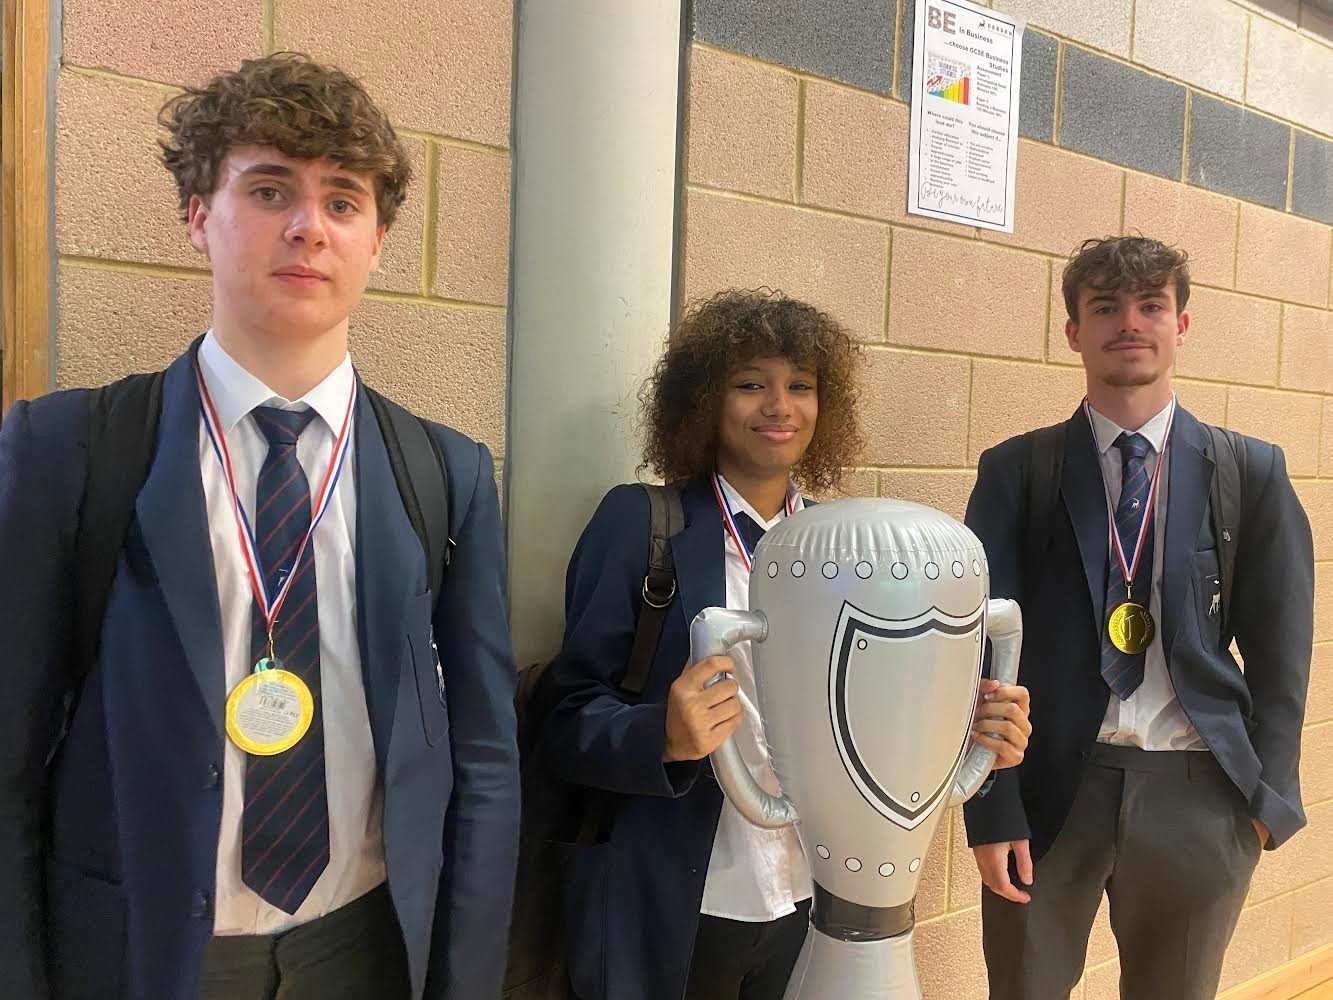 Well done to Madam Laza's Year 11 English class who were awarded the 10 marks in 10 weeks trophy yesterday for gaining the most marks in preparation for their English exam. ⁠
⁠
Here are Milo, Leah &amp; Louis wearing their medals with pride.⁠
⁠
#BEpr